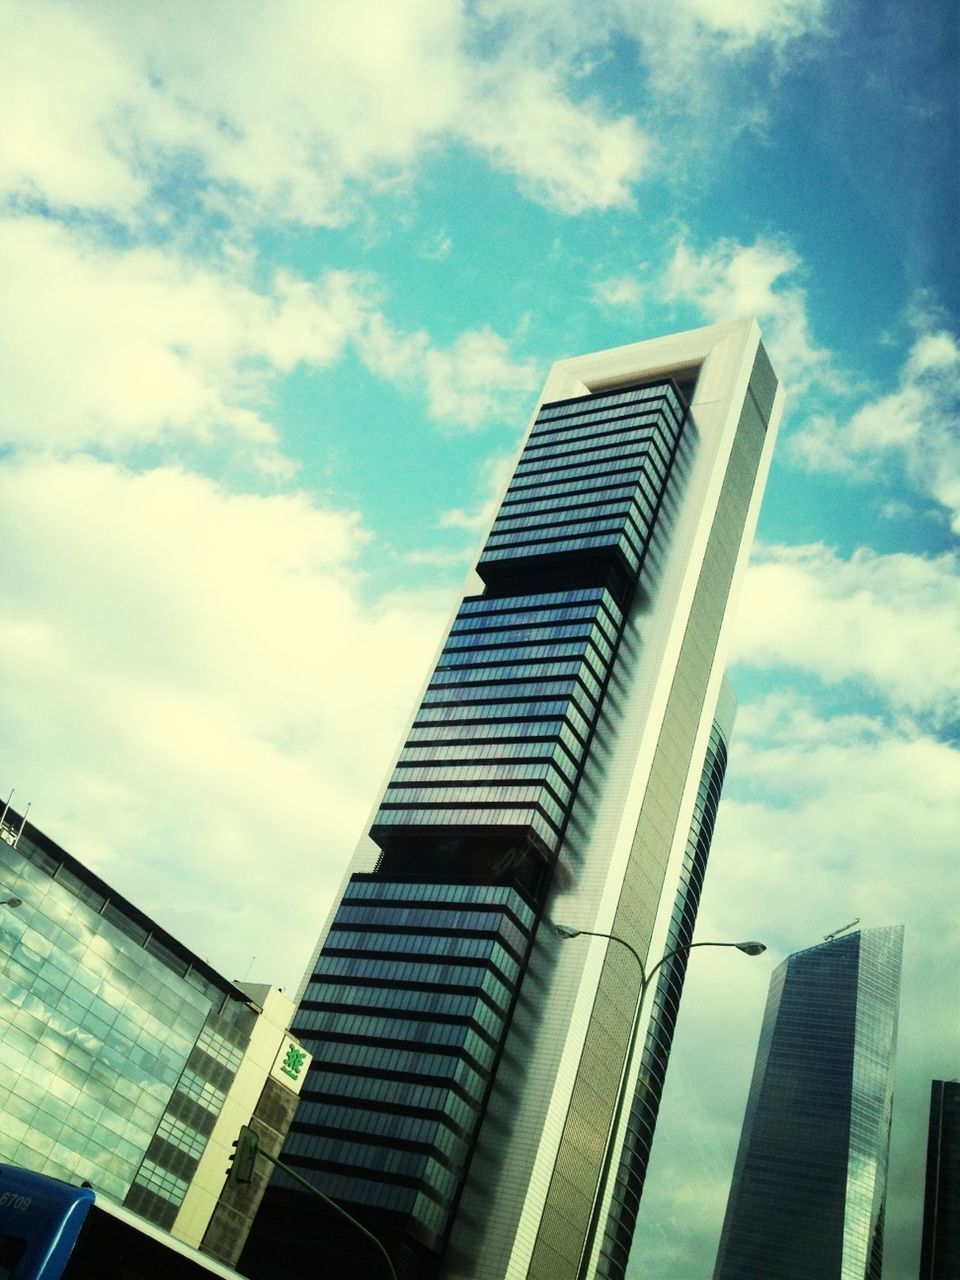 architecture, building exterior, built structure, low angle view, skyscraper, sky, city, modern, office building, tall - high, tower, building, cloud - sky, glass - material, window, cloud, tall, day, reflection, outdoors